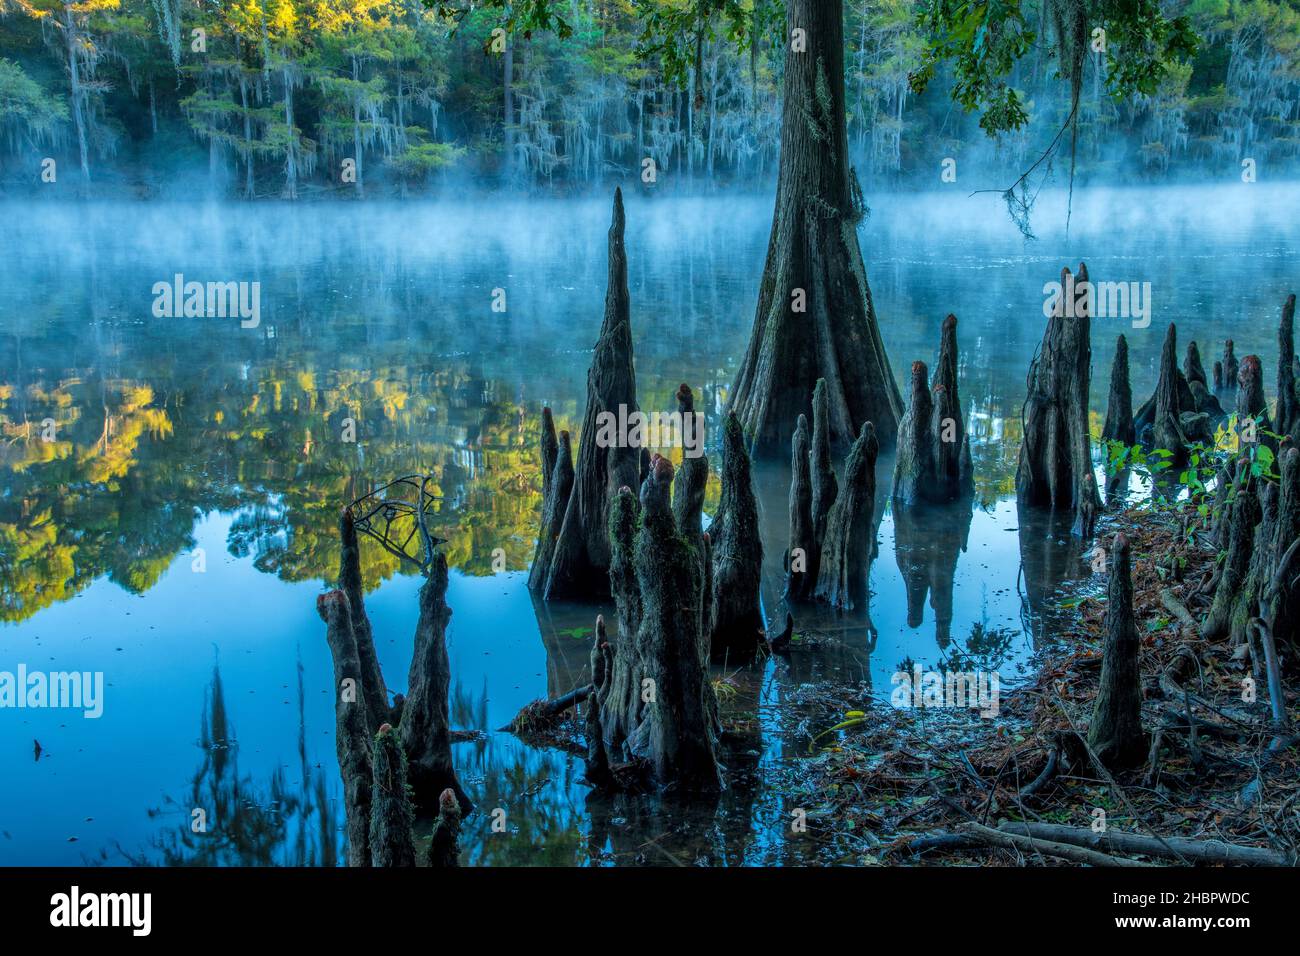 USA, Texas, Caddo lake , Bald Cypress knees *** Local Caption ***  USA, Texas, Caddo lake, Cypress swamp, nature, eastern, american, forest, cypress k Stock Photo